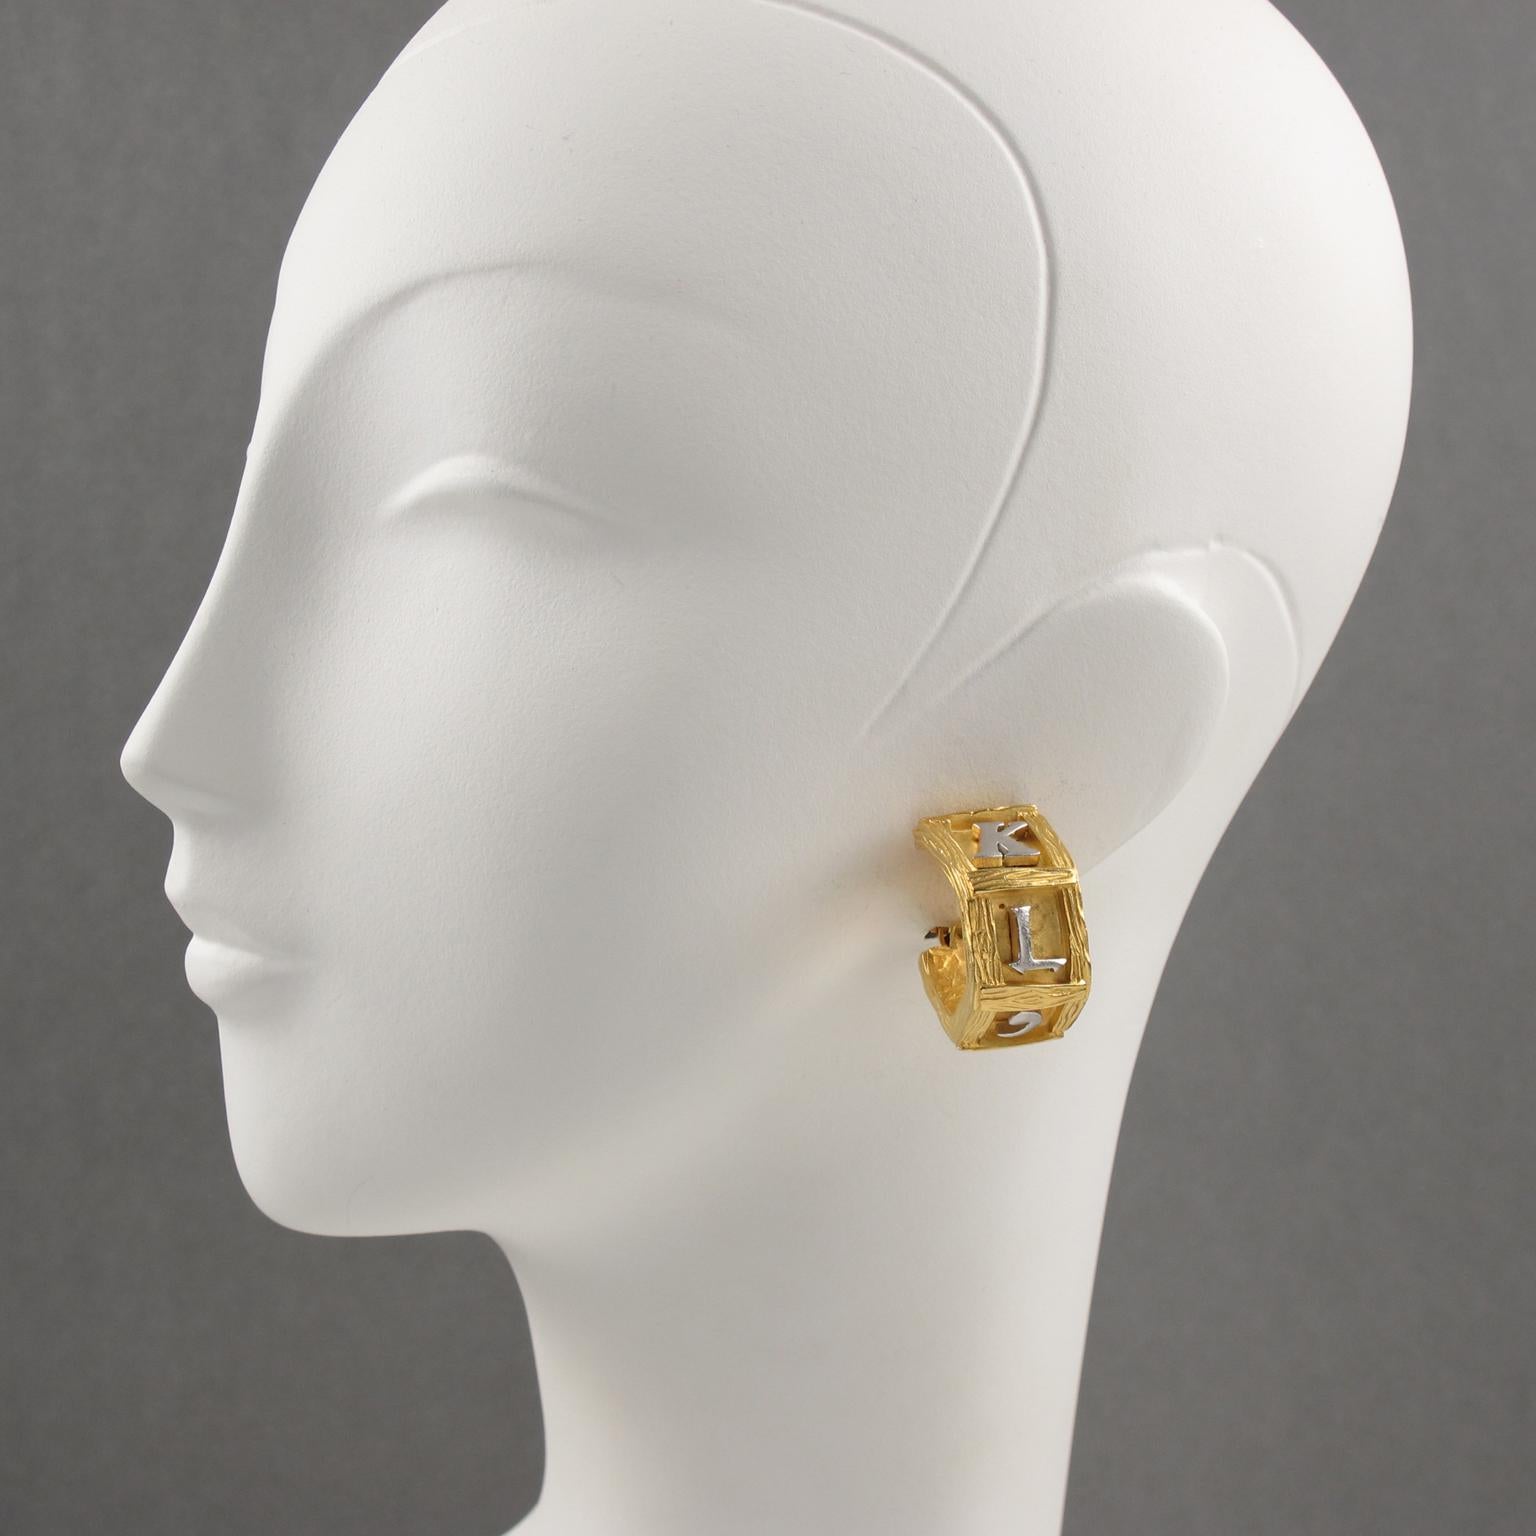 Stunning Karl Lagerfeld Paris signed clip-on earrings. Large hoop shape with geometric design in brushed gilt metal with texture and carving, topped with silvered metal carved 